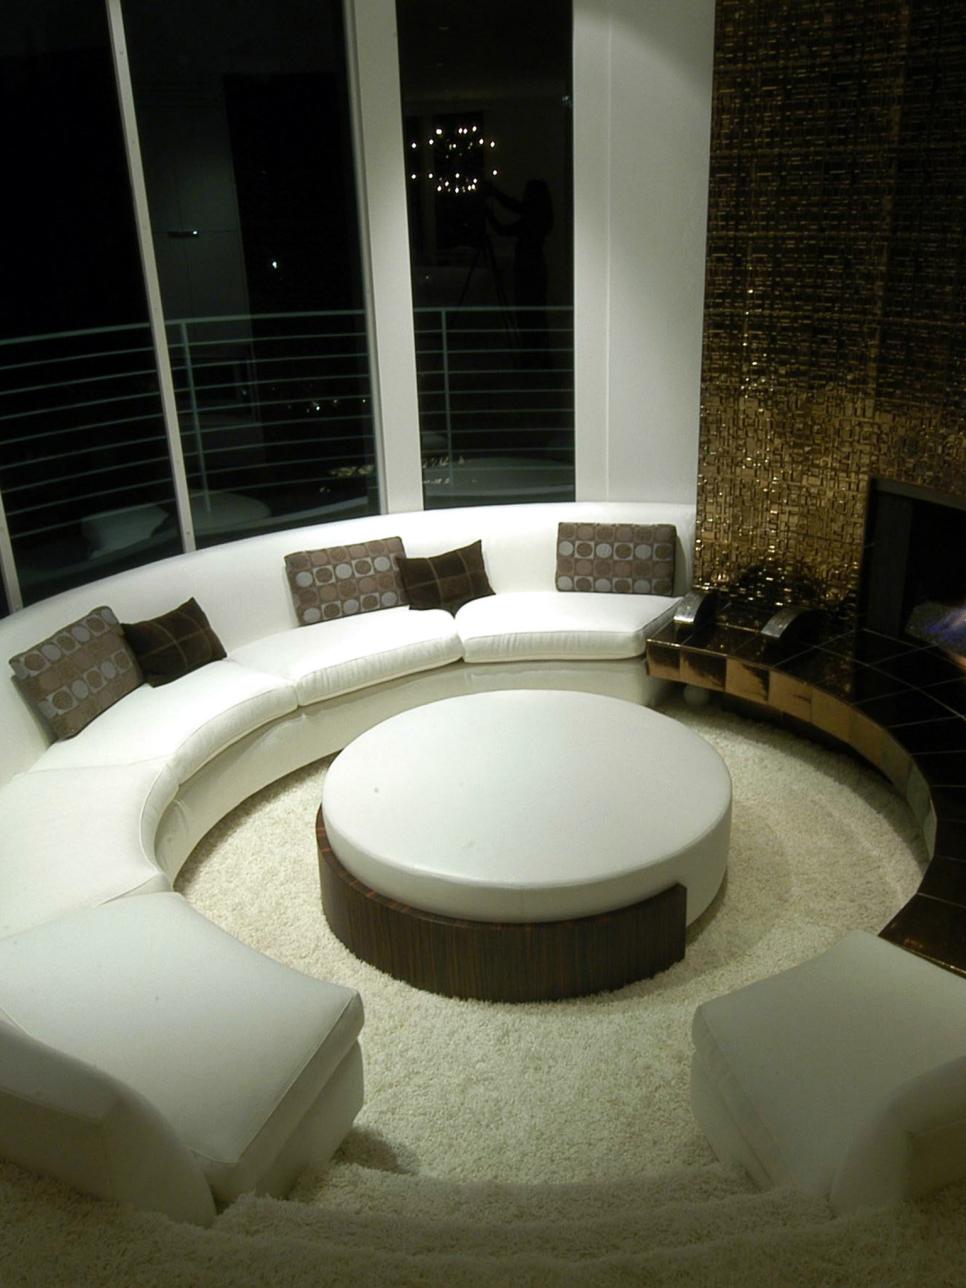 Living Room With Curved White Sofa and Metallic Fireplace Surround